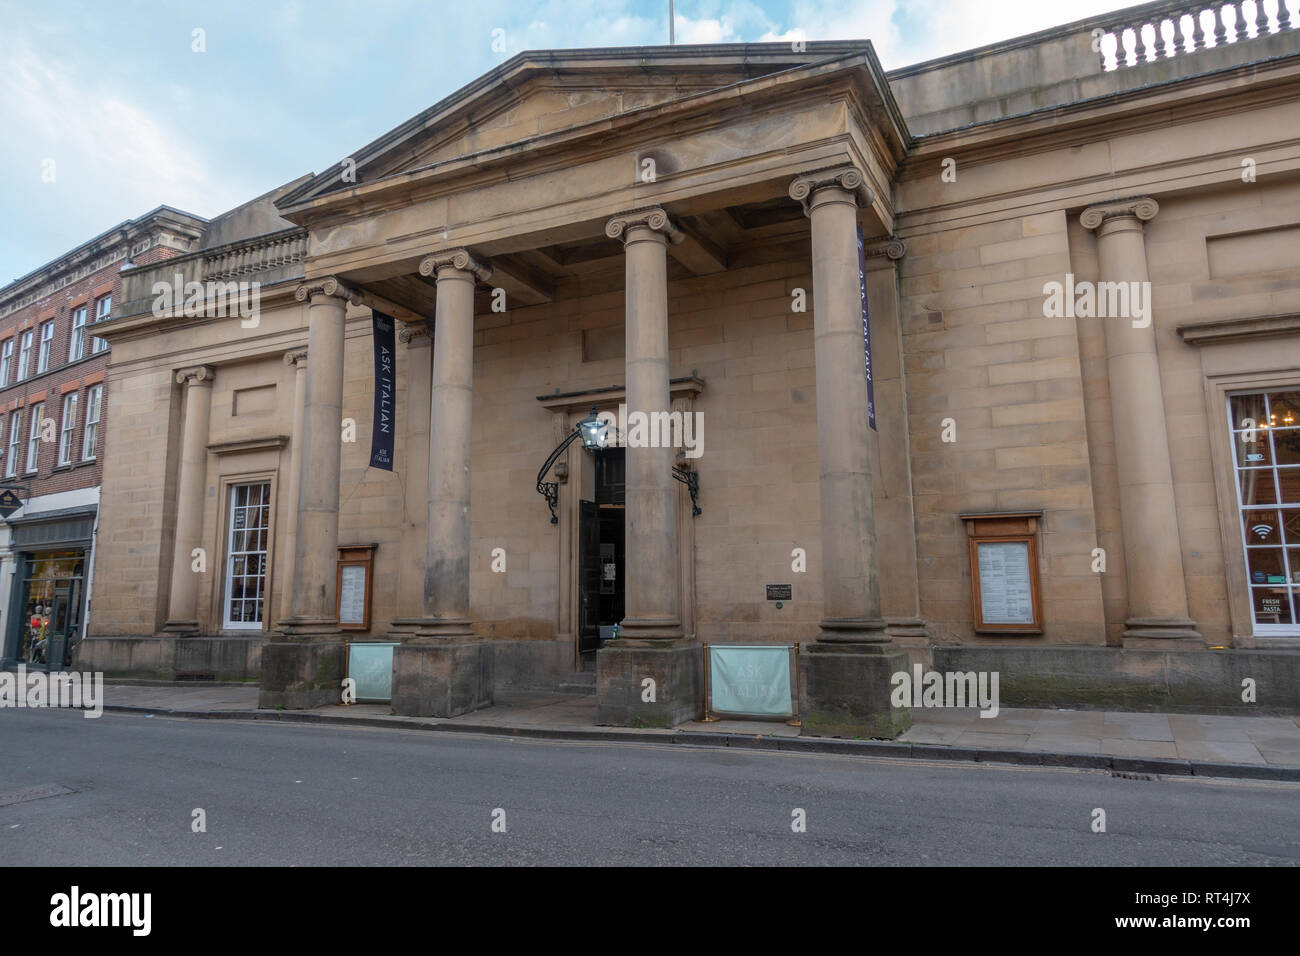 The Assembly Rooms (now an ASK Pizza Restaurant) in the City of York, North Yorkshire, UK. Stock Photo